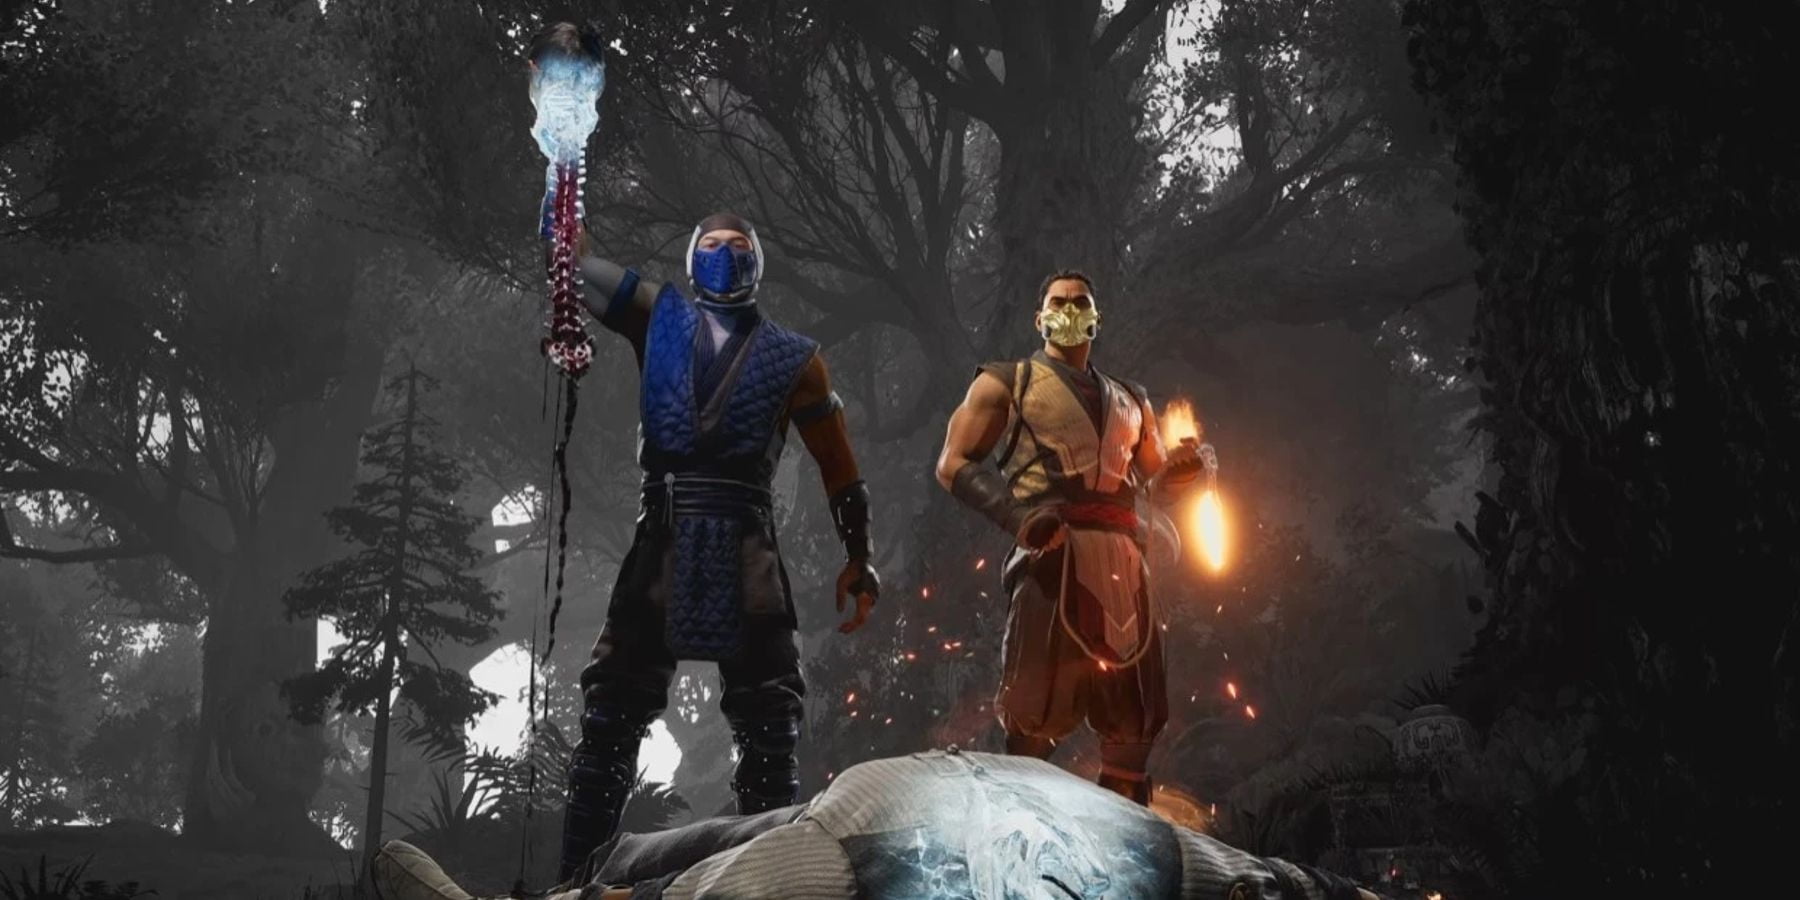 All Mortal Kombat 1 fighters and Kameo fighters confirmed